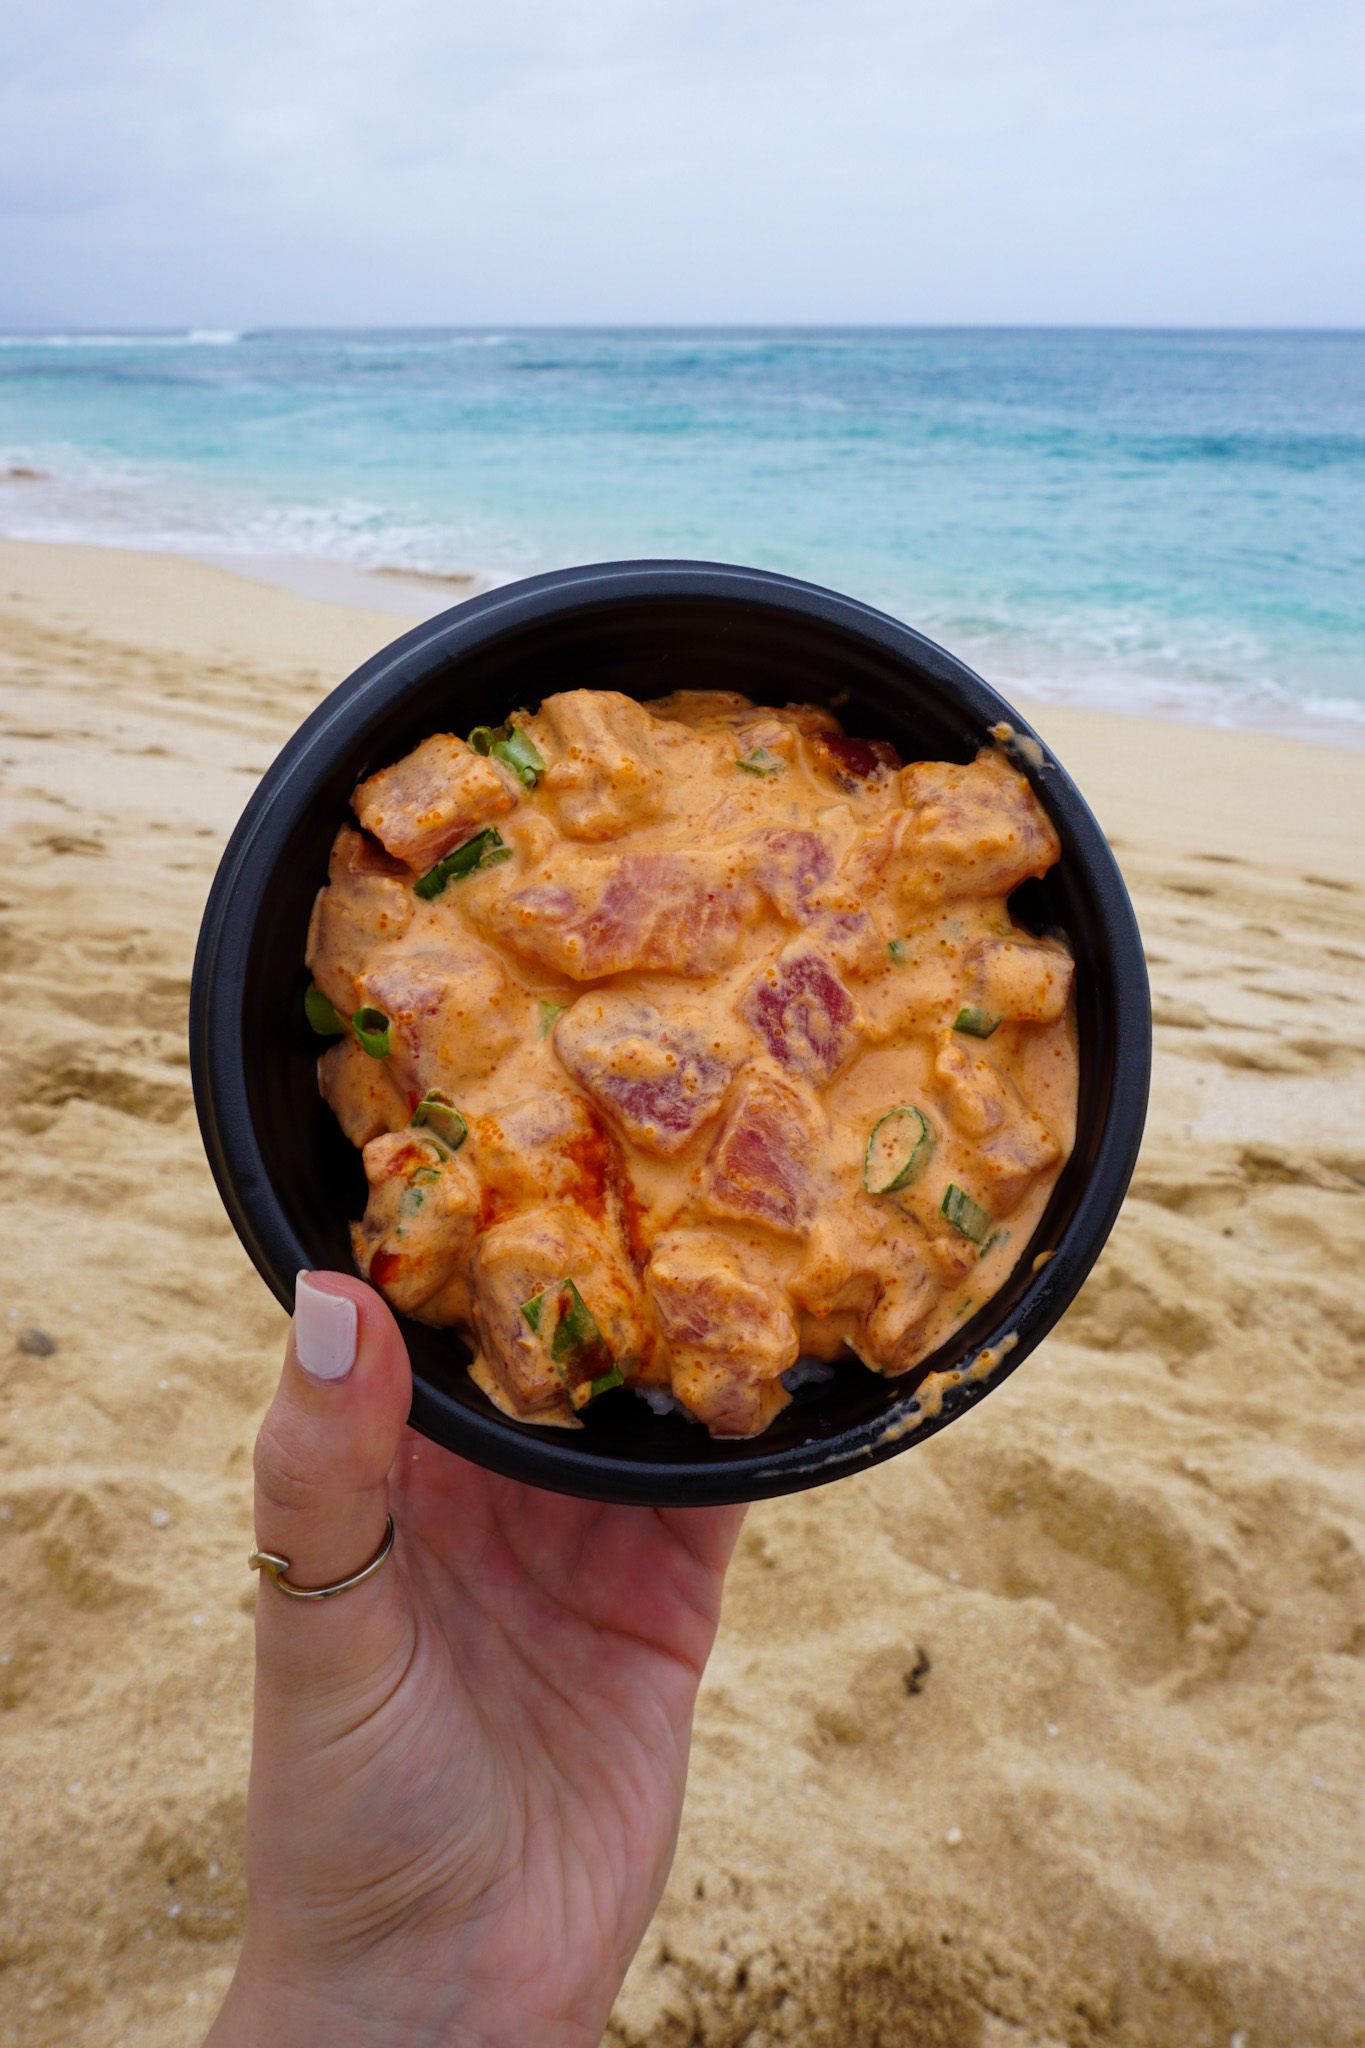 Spicy Ahi Tuna Poke over rice from Foodland in Pupukea - North Shore Oahu, Hawaii. The best lunch or dinner on Oahu!